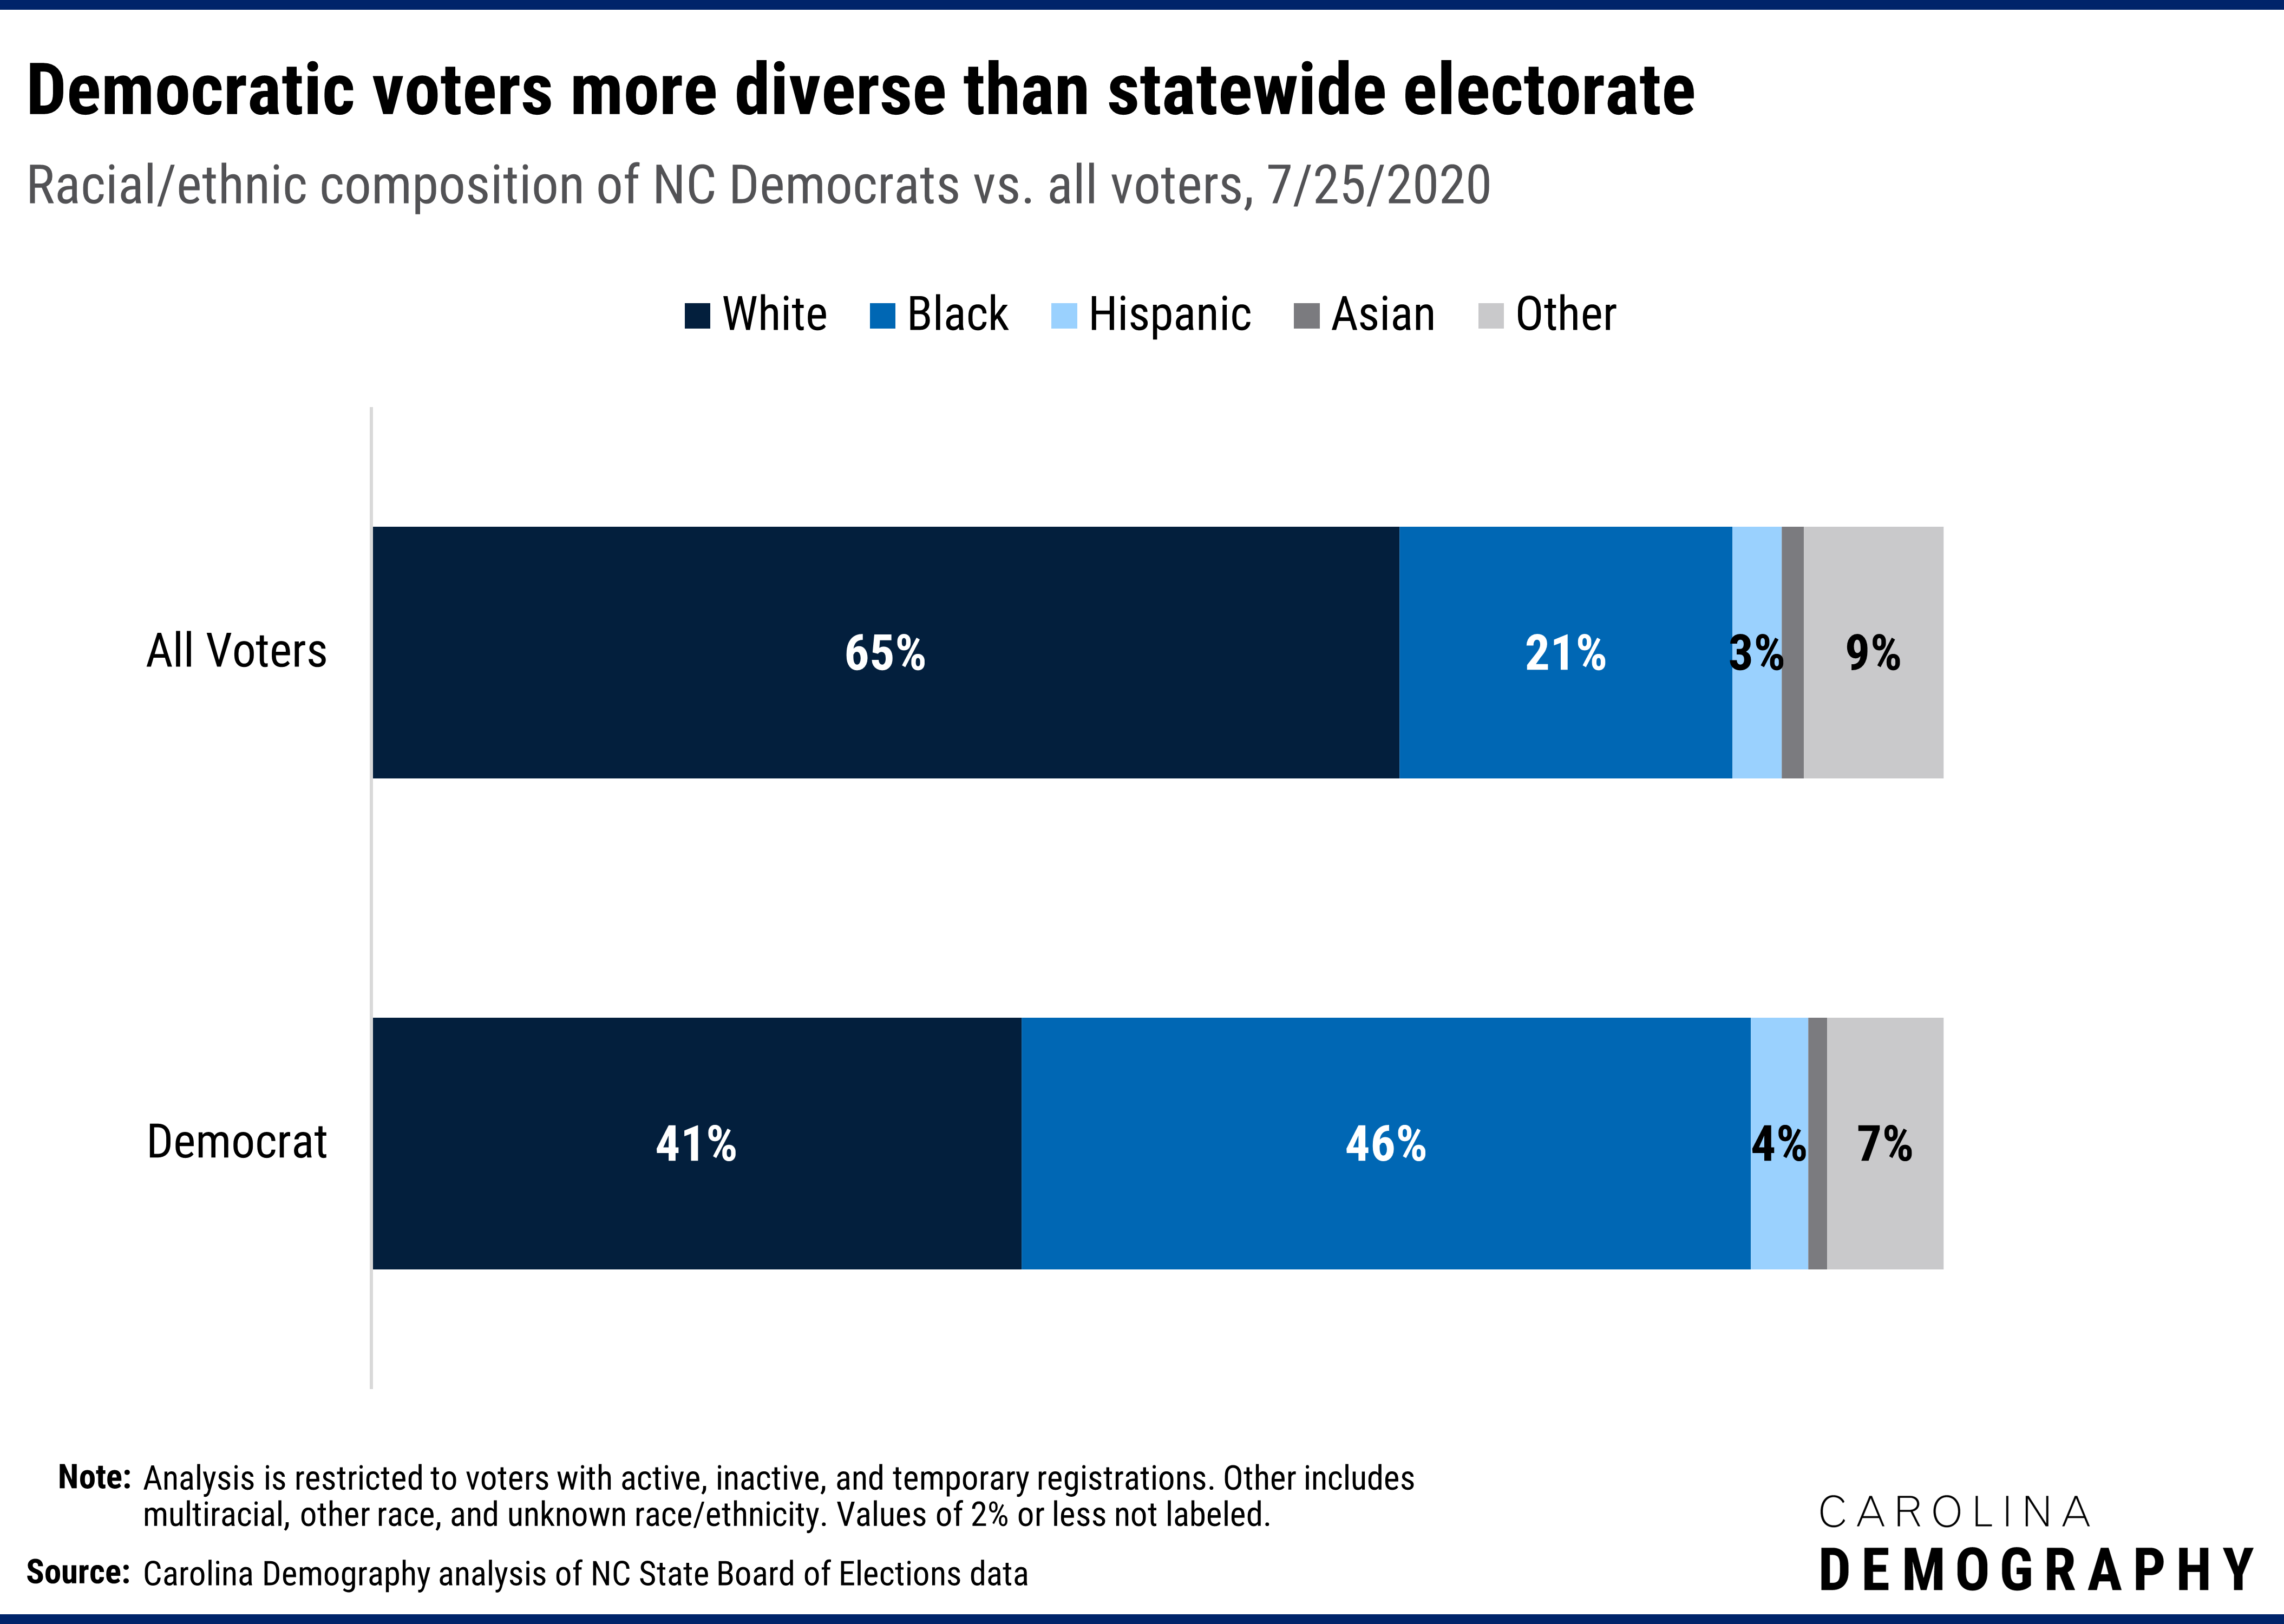 Democratic voters more diverse than statewide electorate Racial/ethnic composition of NC Democrats vs. all voters, 7/25/2020. Democratic voters are more diverse than the statewide electorate. Black voters comprise the largest racial/ethnic group among Democratic voters: 46% versus 21% statewide. White voters are the second largest group among registered Democrats (41% vs. 65% statewide.)